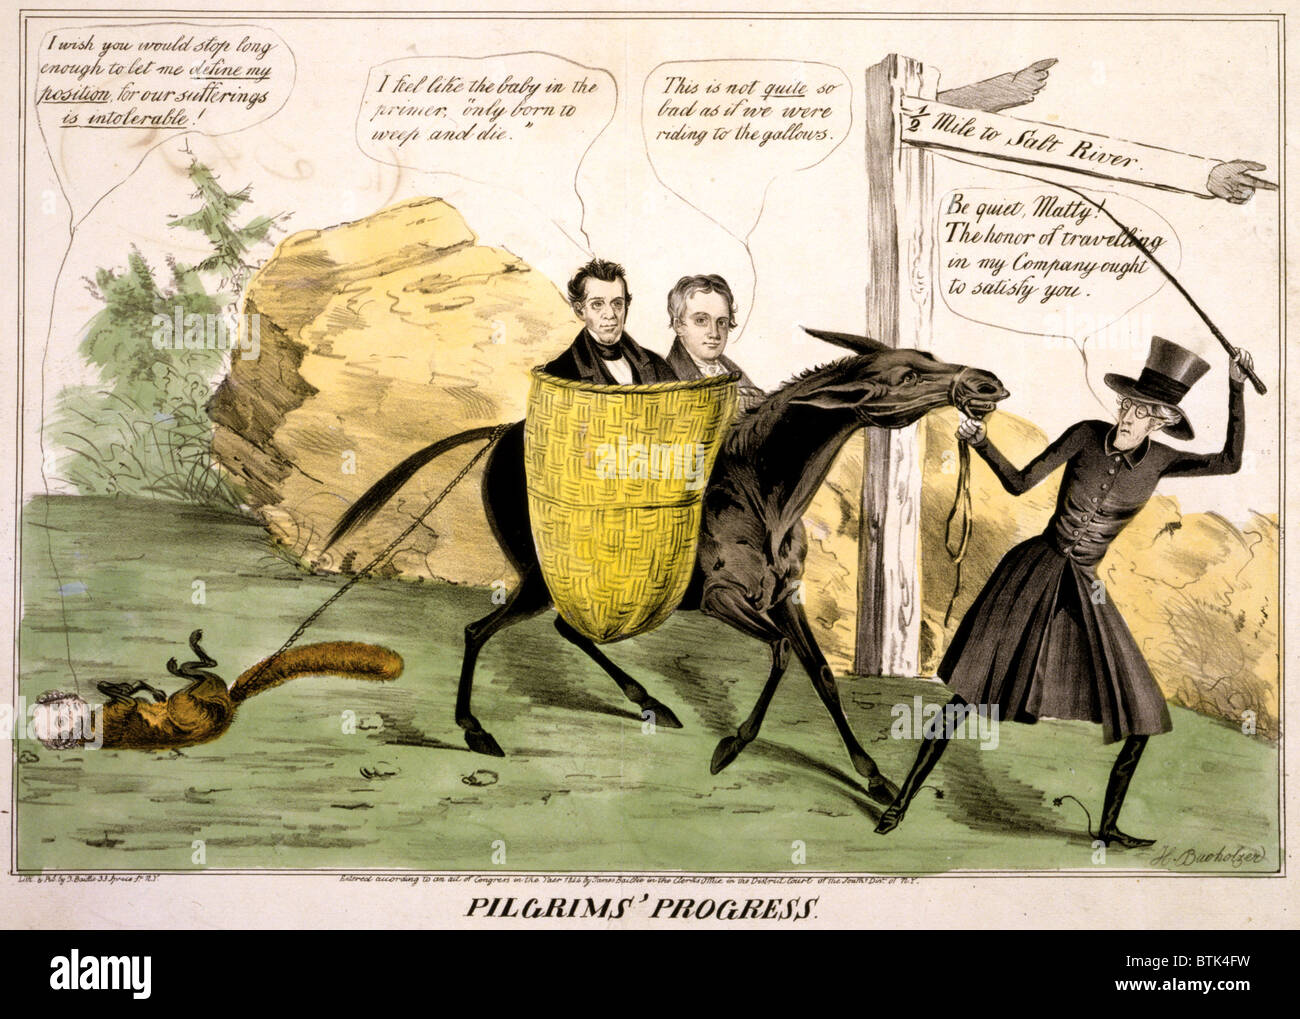 'Pilgrims' progress', showing ex-President Andrew Jackson leading the Democratic Party Donkey which carries James K. Polk and George Dallas to political disaster in the election of 1844. Watercolored engraving, 1844. Stock Photo